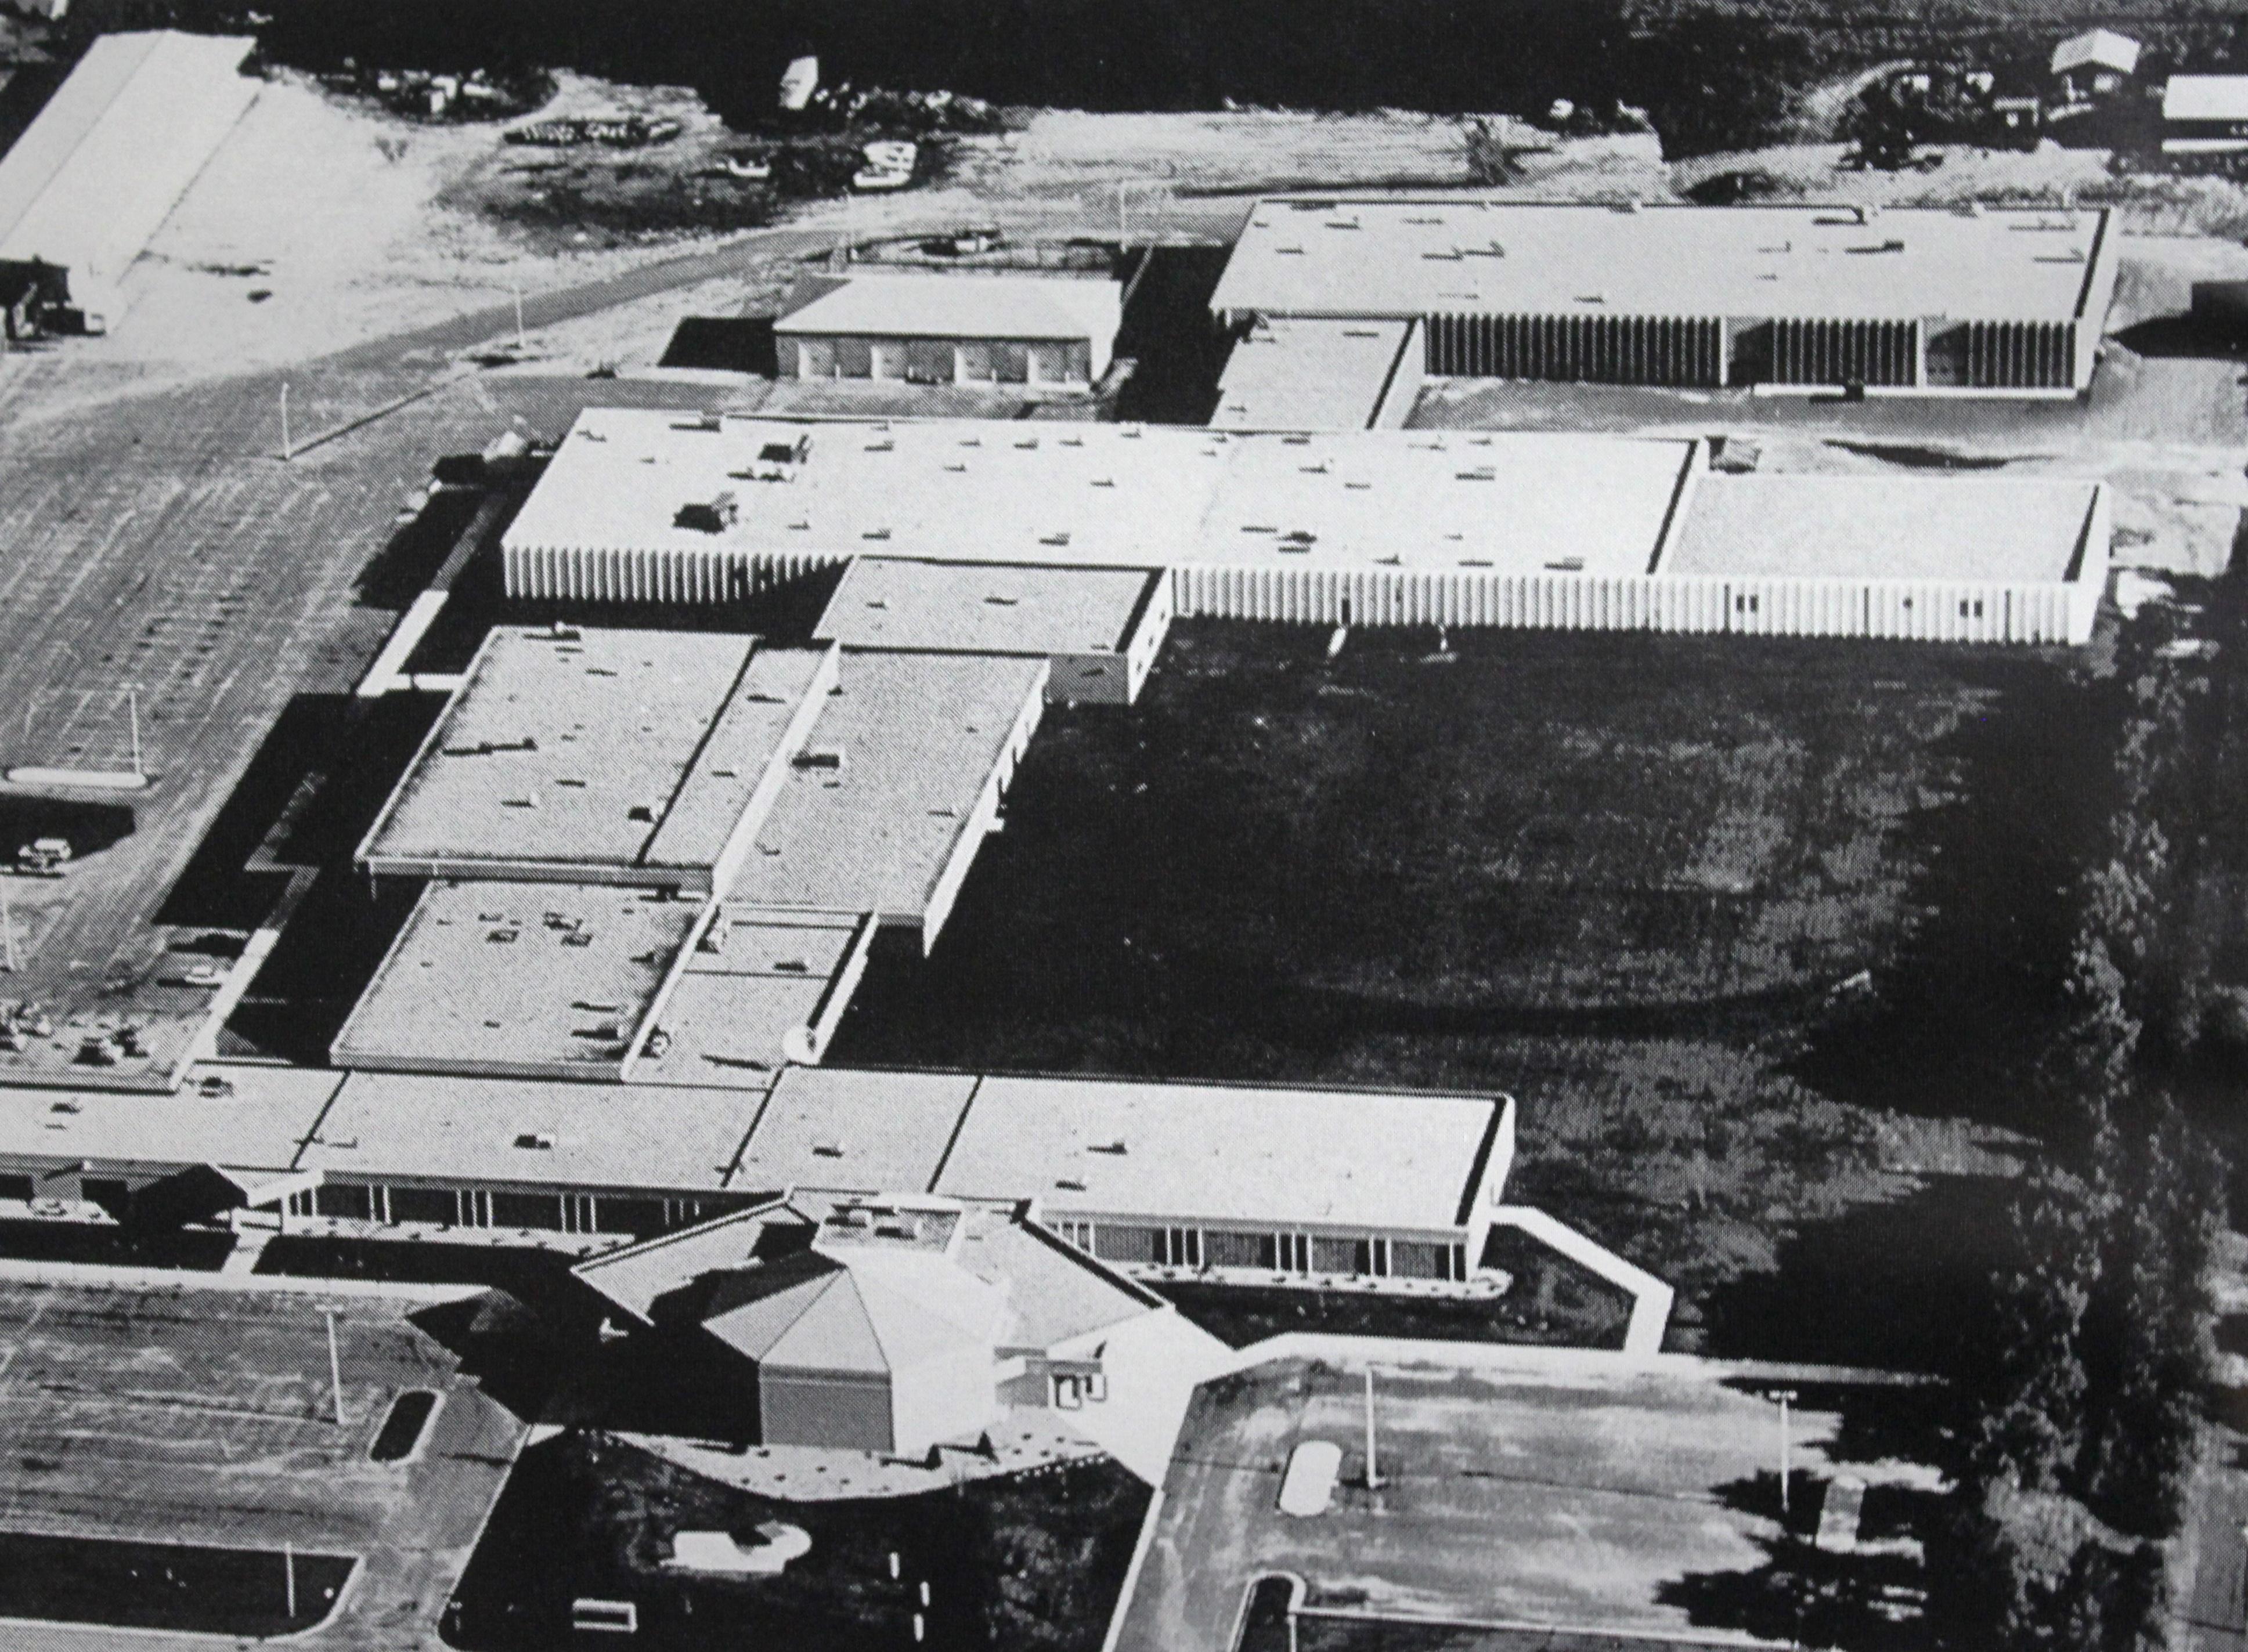 An aerial view of the 底特律的湖泊 campus, in 1997